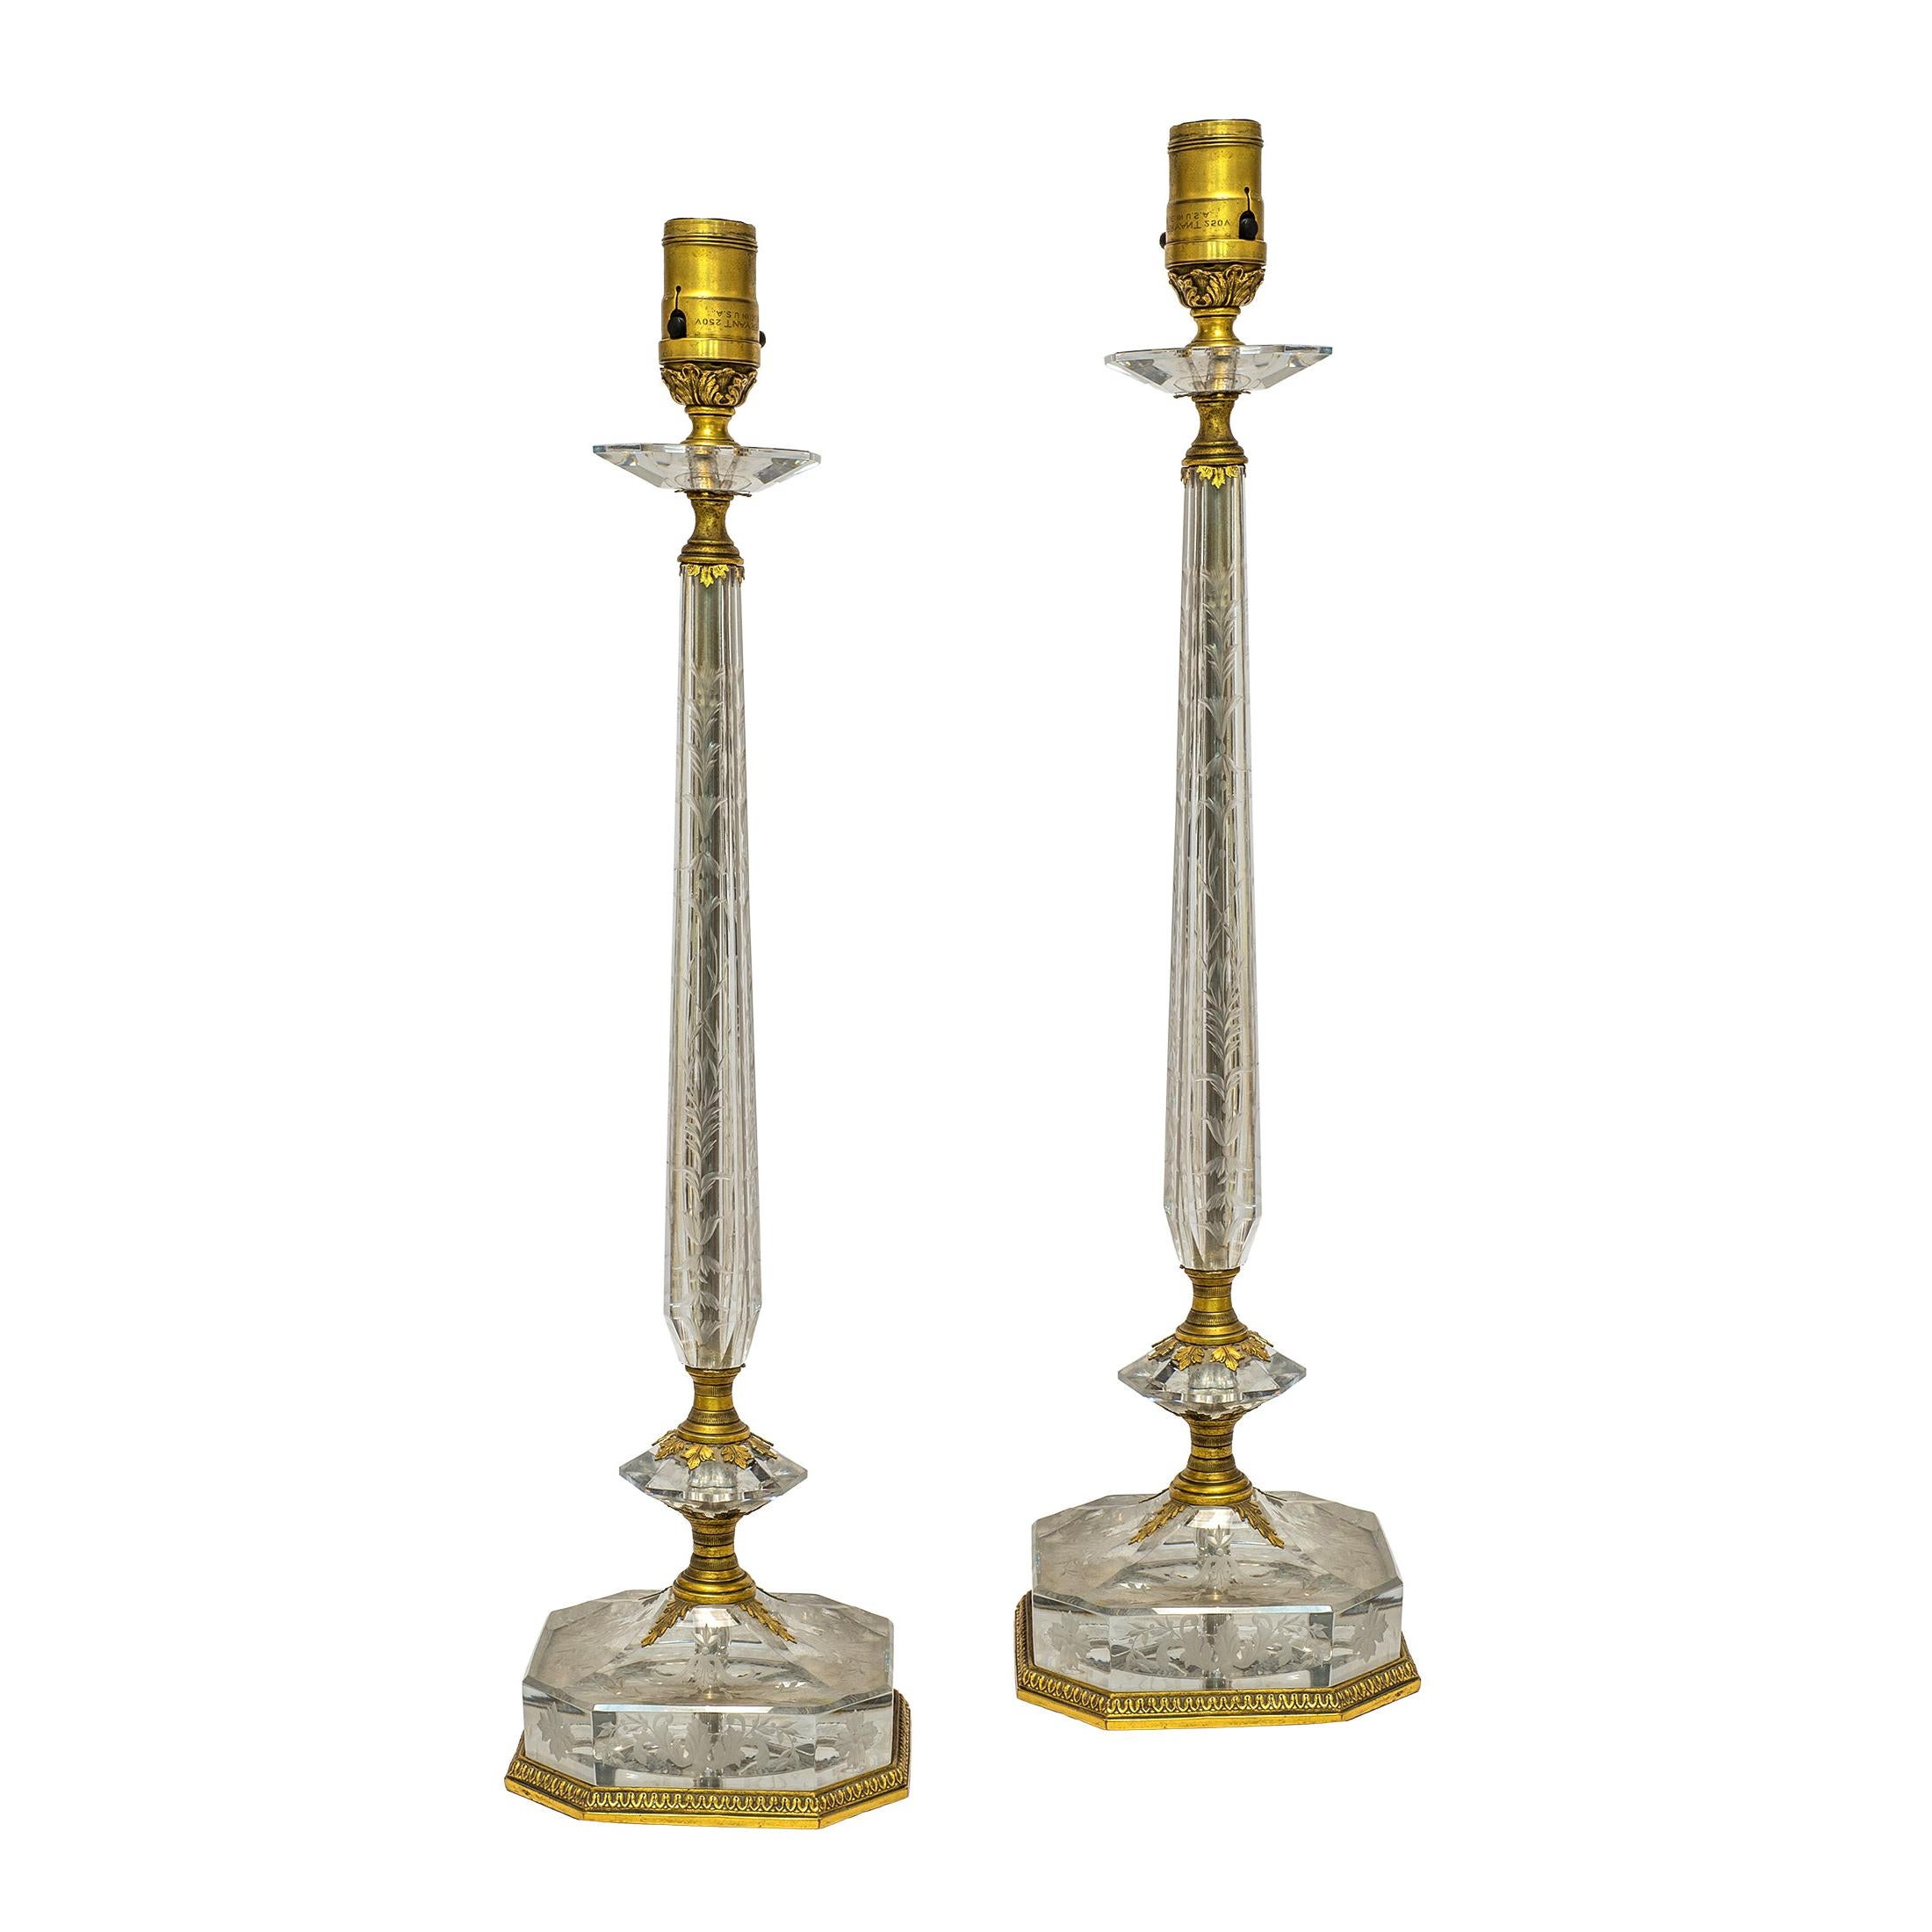 Pair of Gilt Bronze and Crystal Table Lamps attributed to E. F. Caldwell